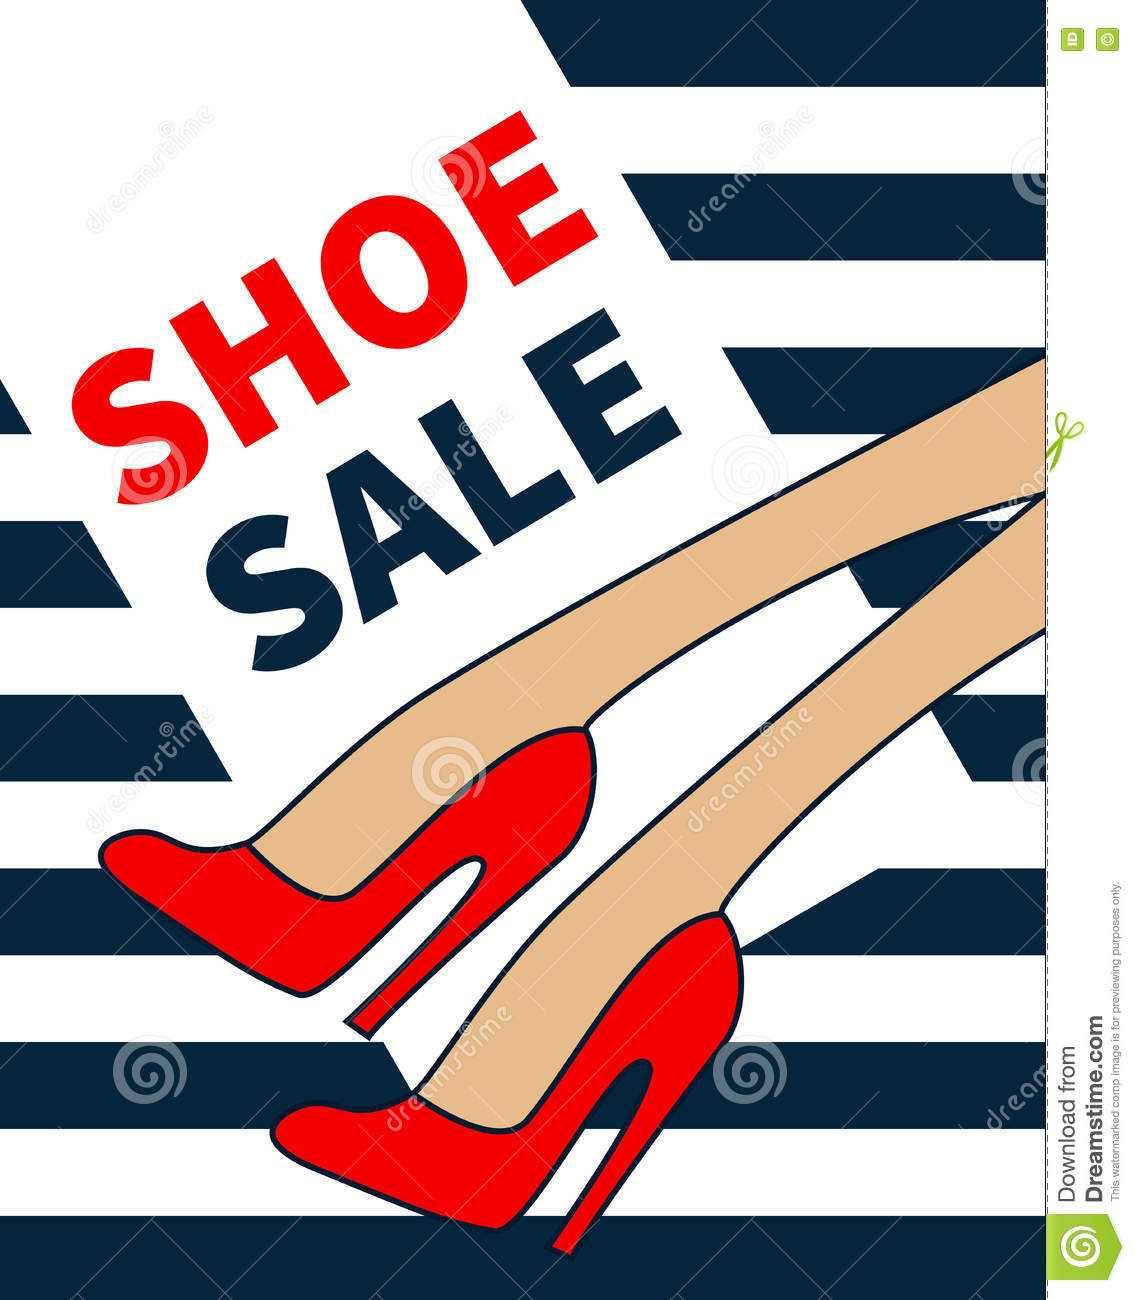 Vector Shoe Sale Stock Vector. Illustration Of Footwear In High Heel Template For Cards